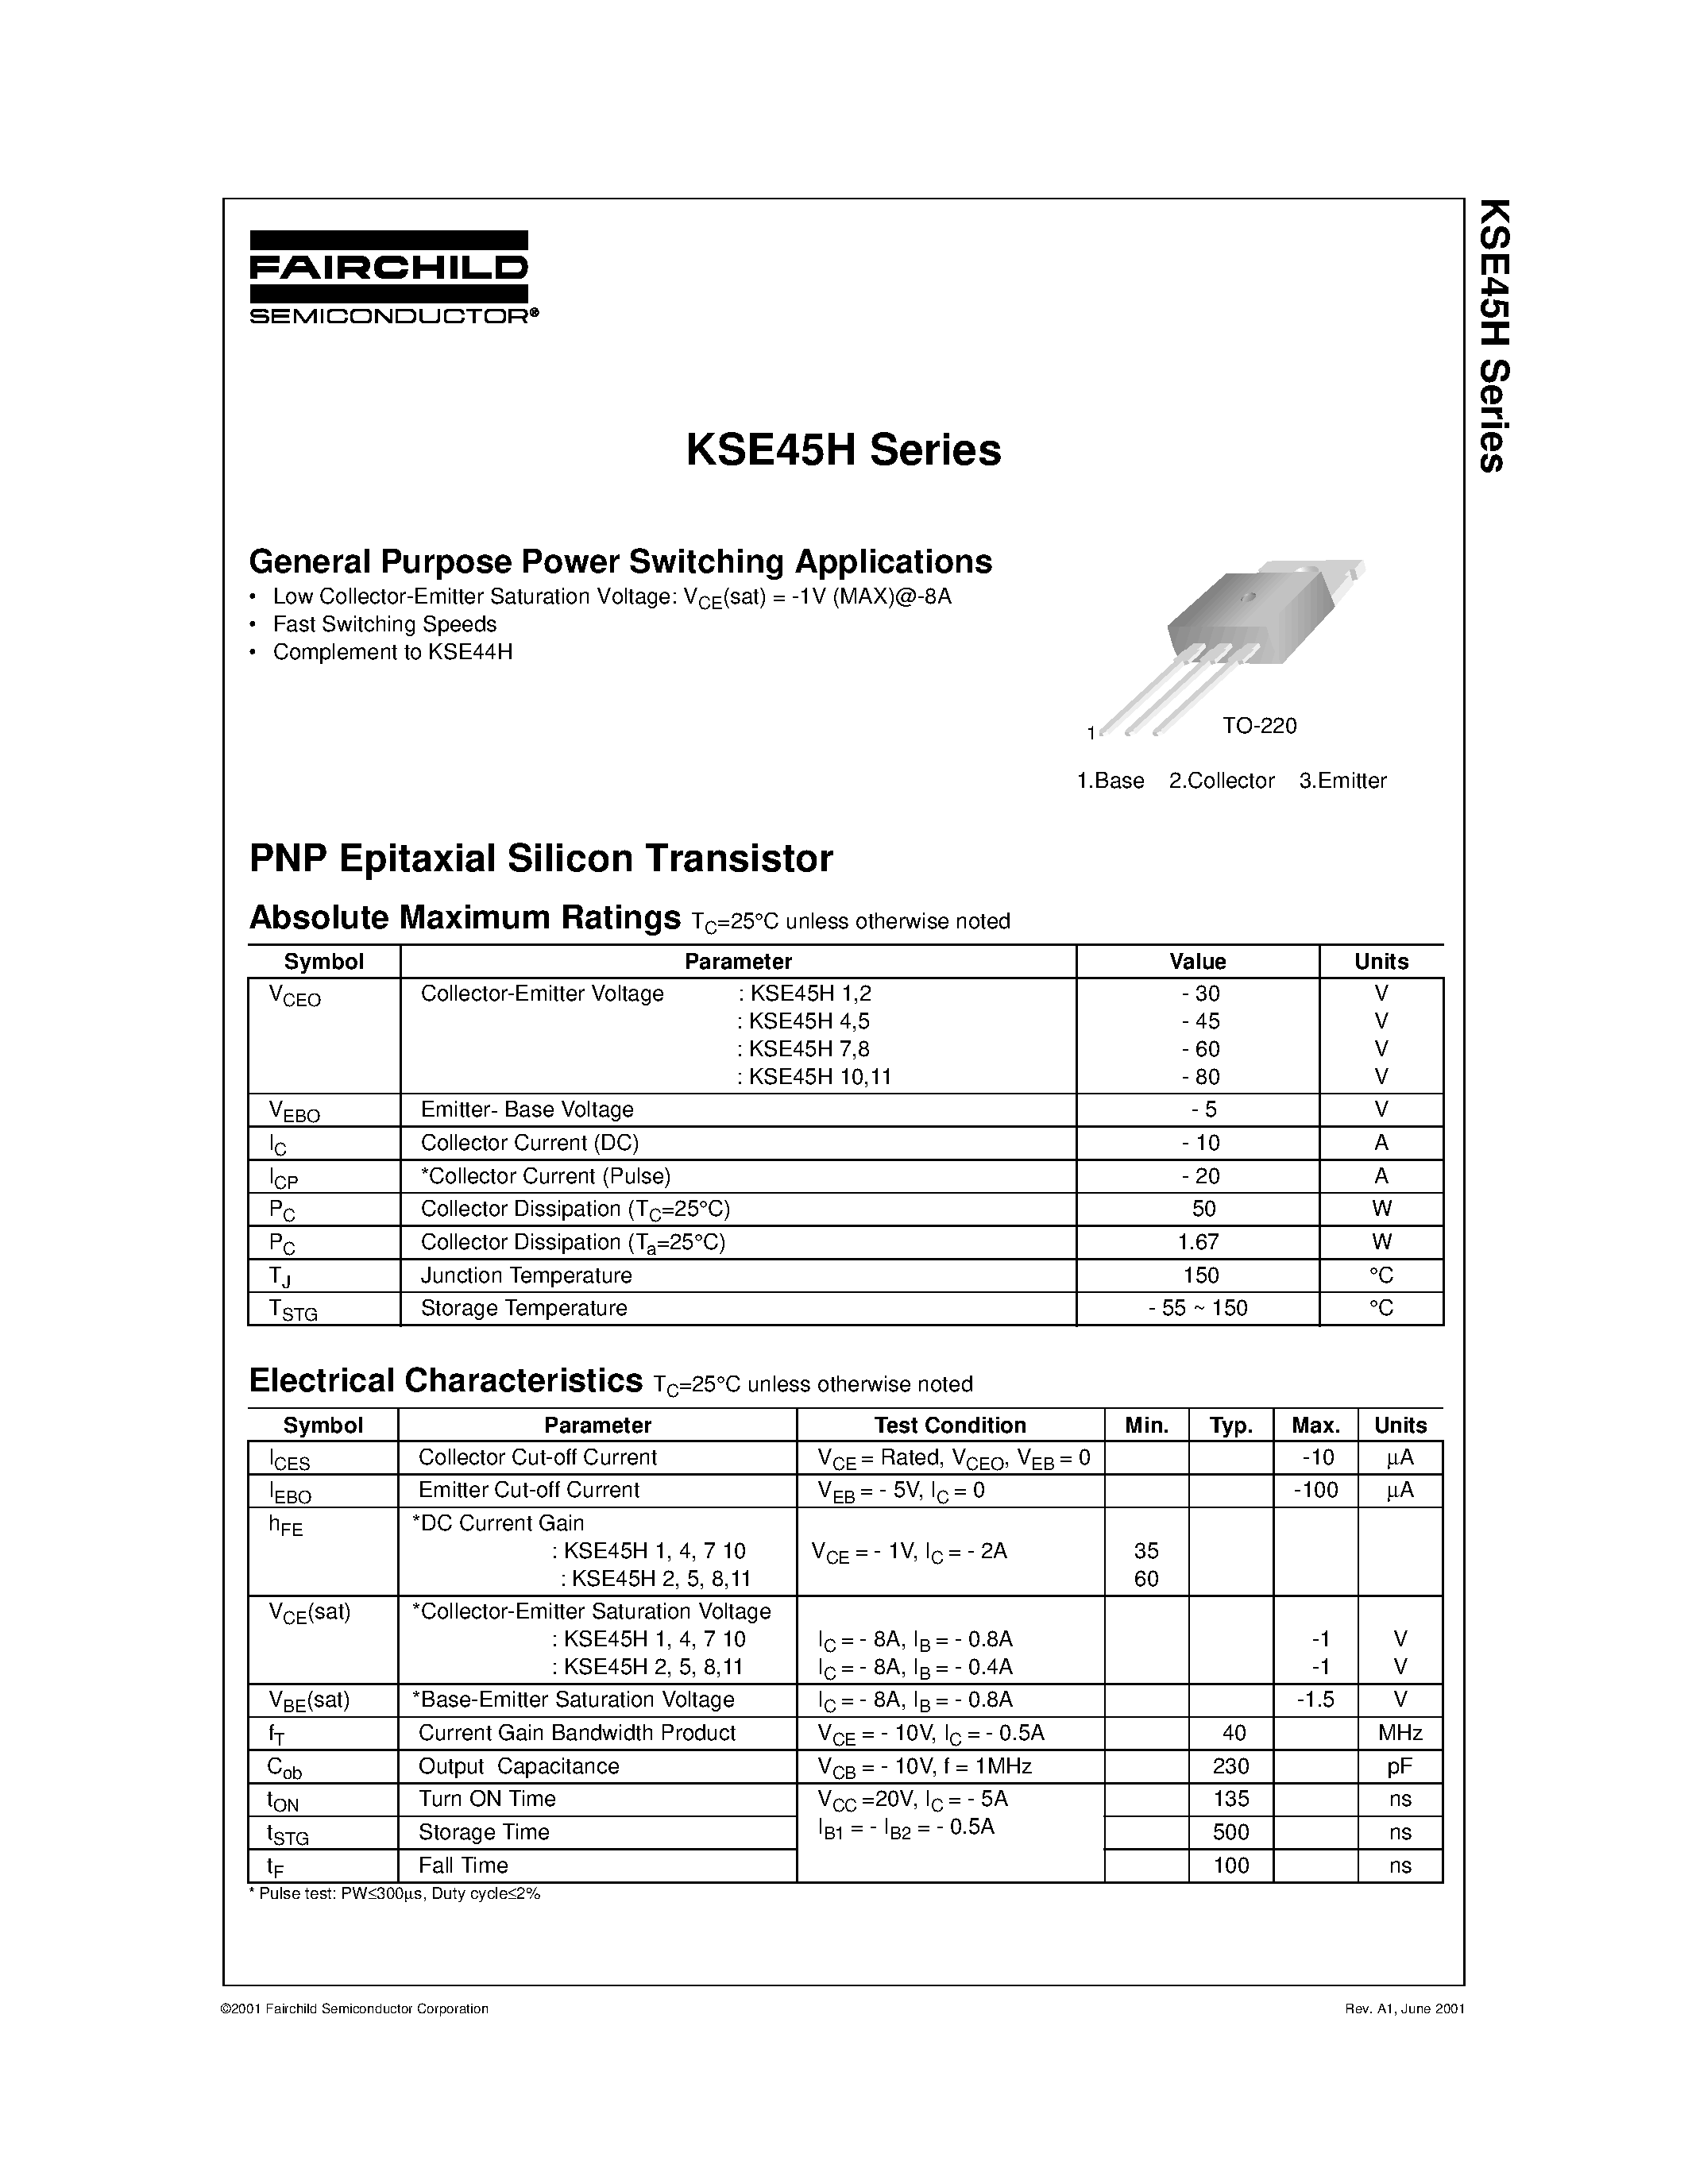 Даташит KSE45H5 - General Purpose Power Switching Applications страница 1